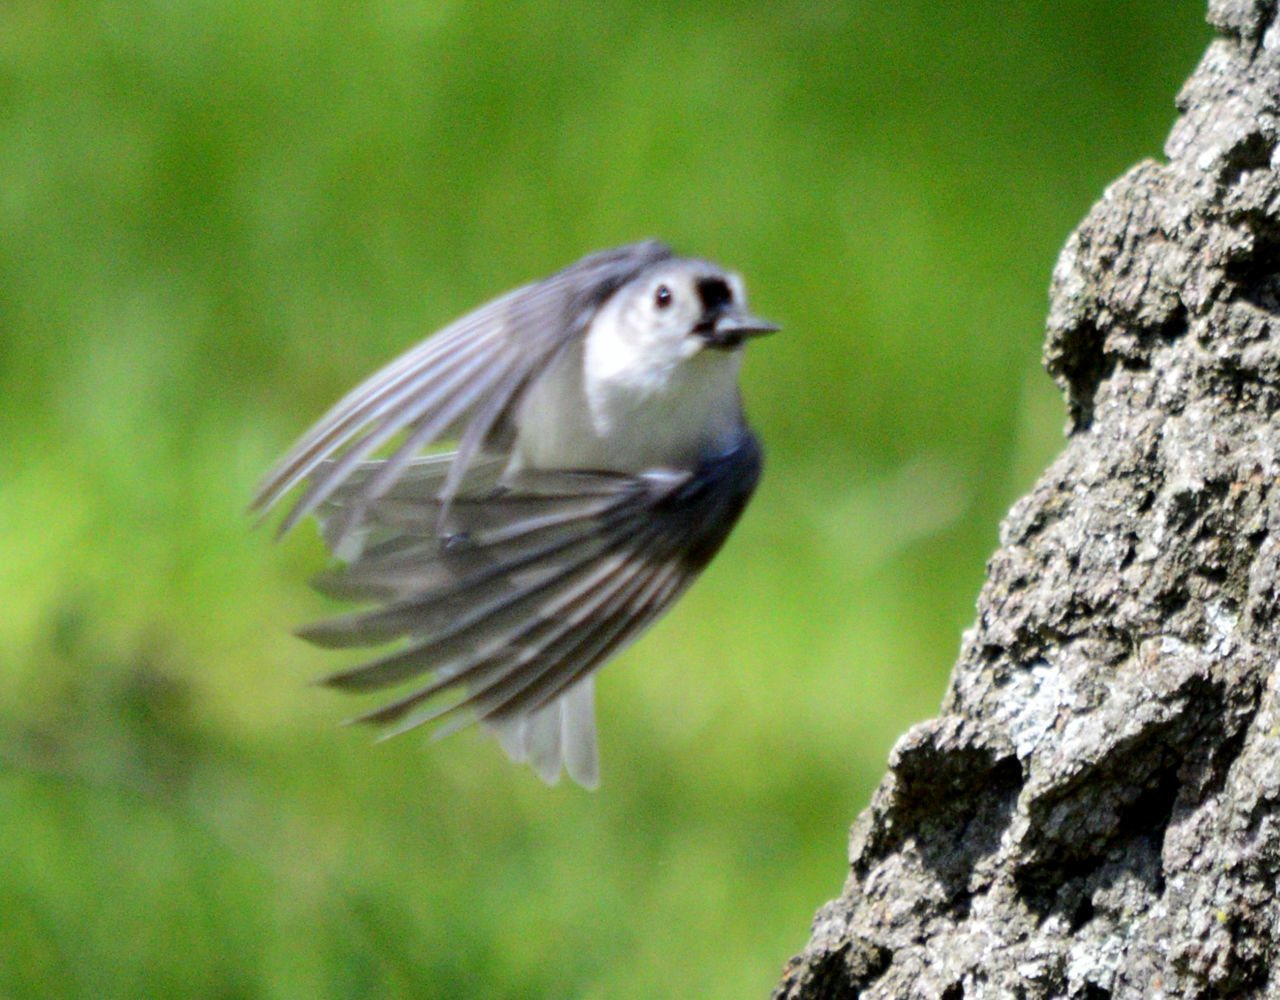 CLOSE-UP OF A BIRD FLYING